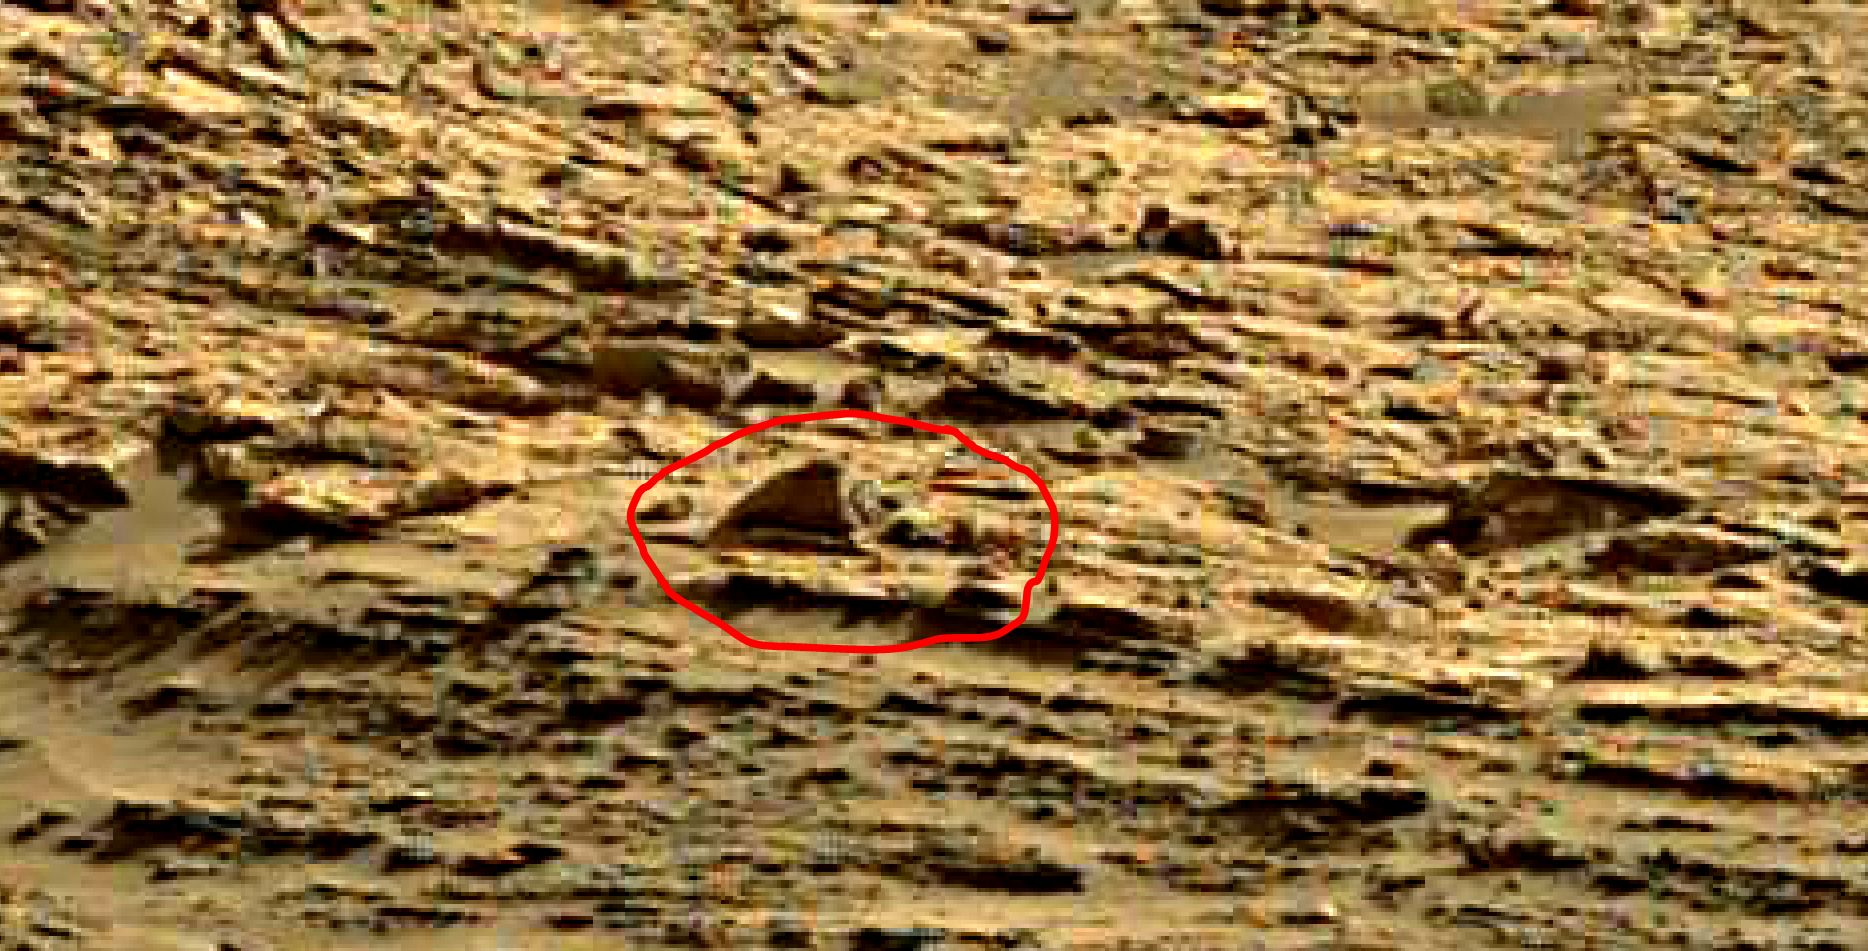 mars sol 1376 anomaly-artifacts 3a was life on mars